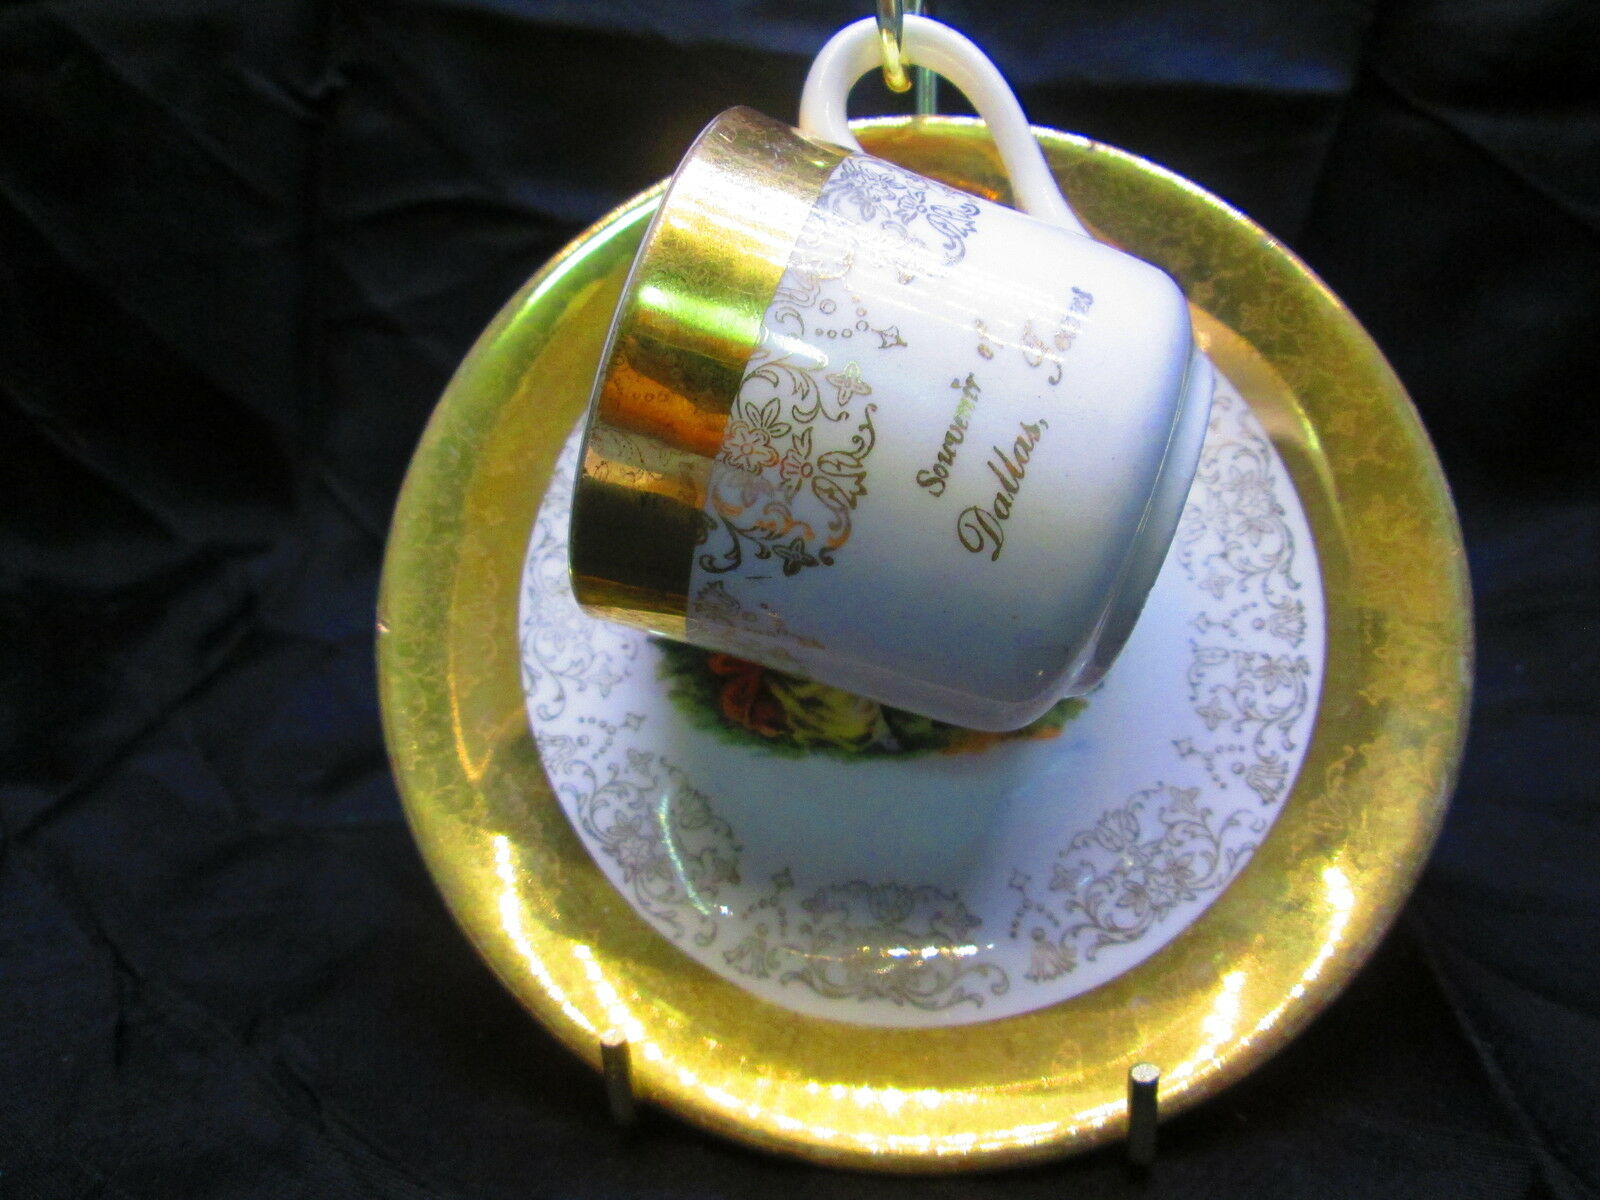 Demitasse Cup - Crest-o-Gold - Made in the U.S.A. - Warranted 22K Gold